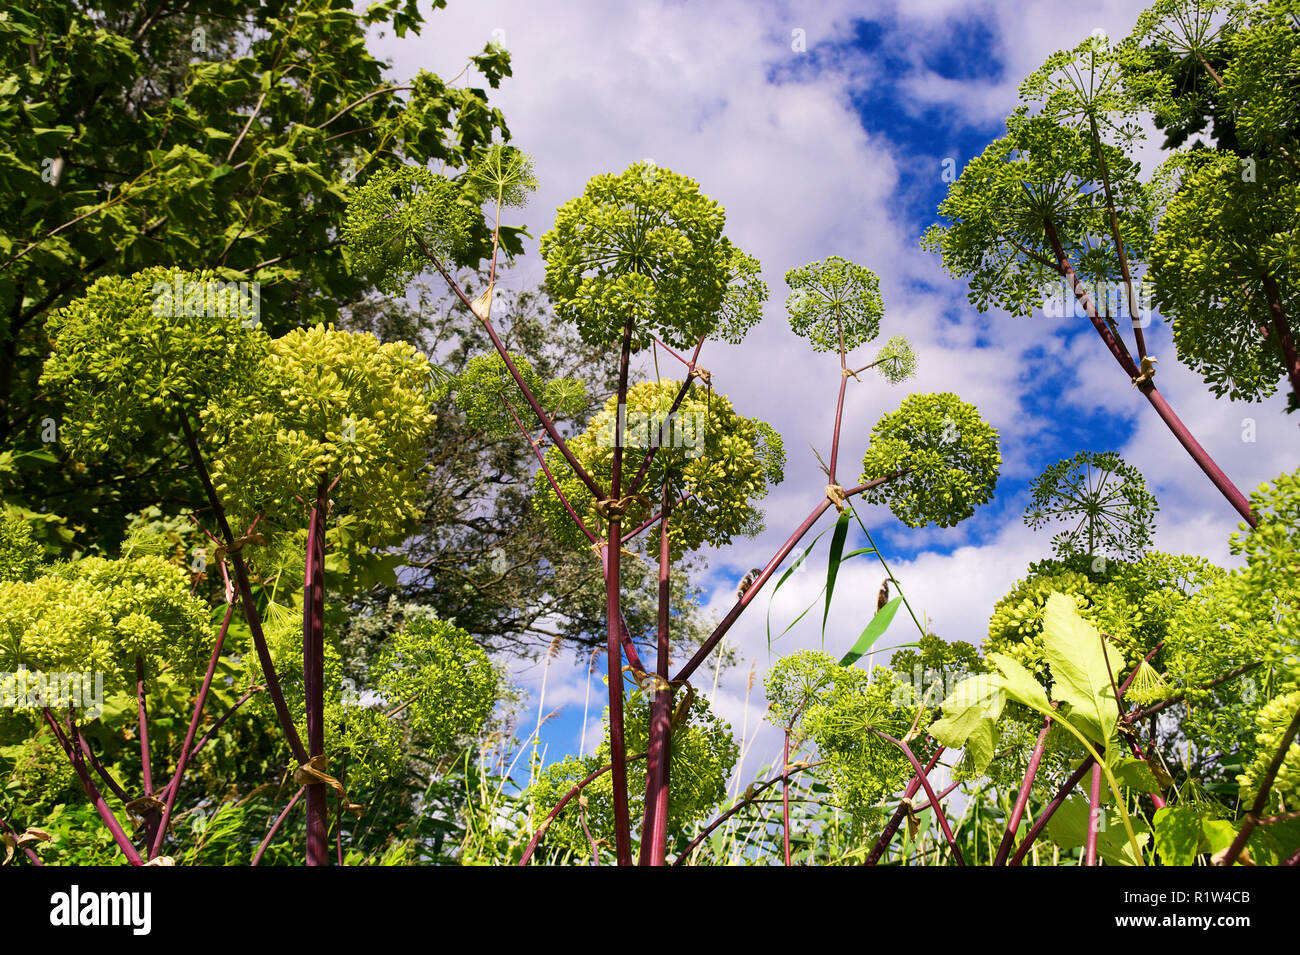 Angelica archangelica, garden angelica or wild celery plant on the sky background. View from the bottom up. Pomerania, Poland. Stock Photo